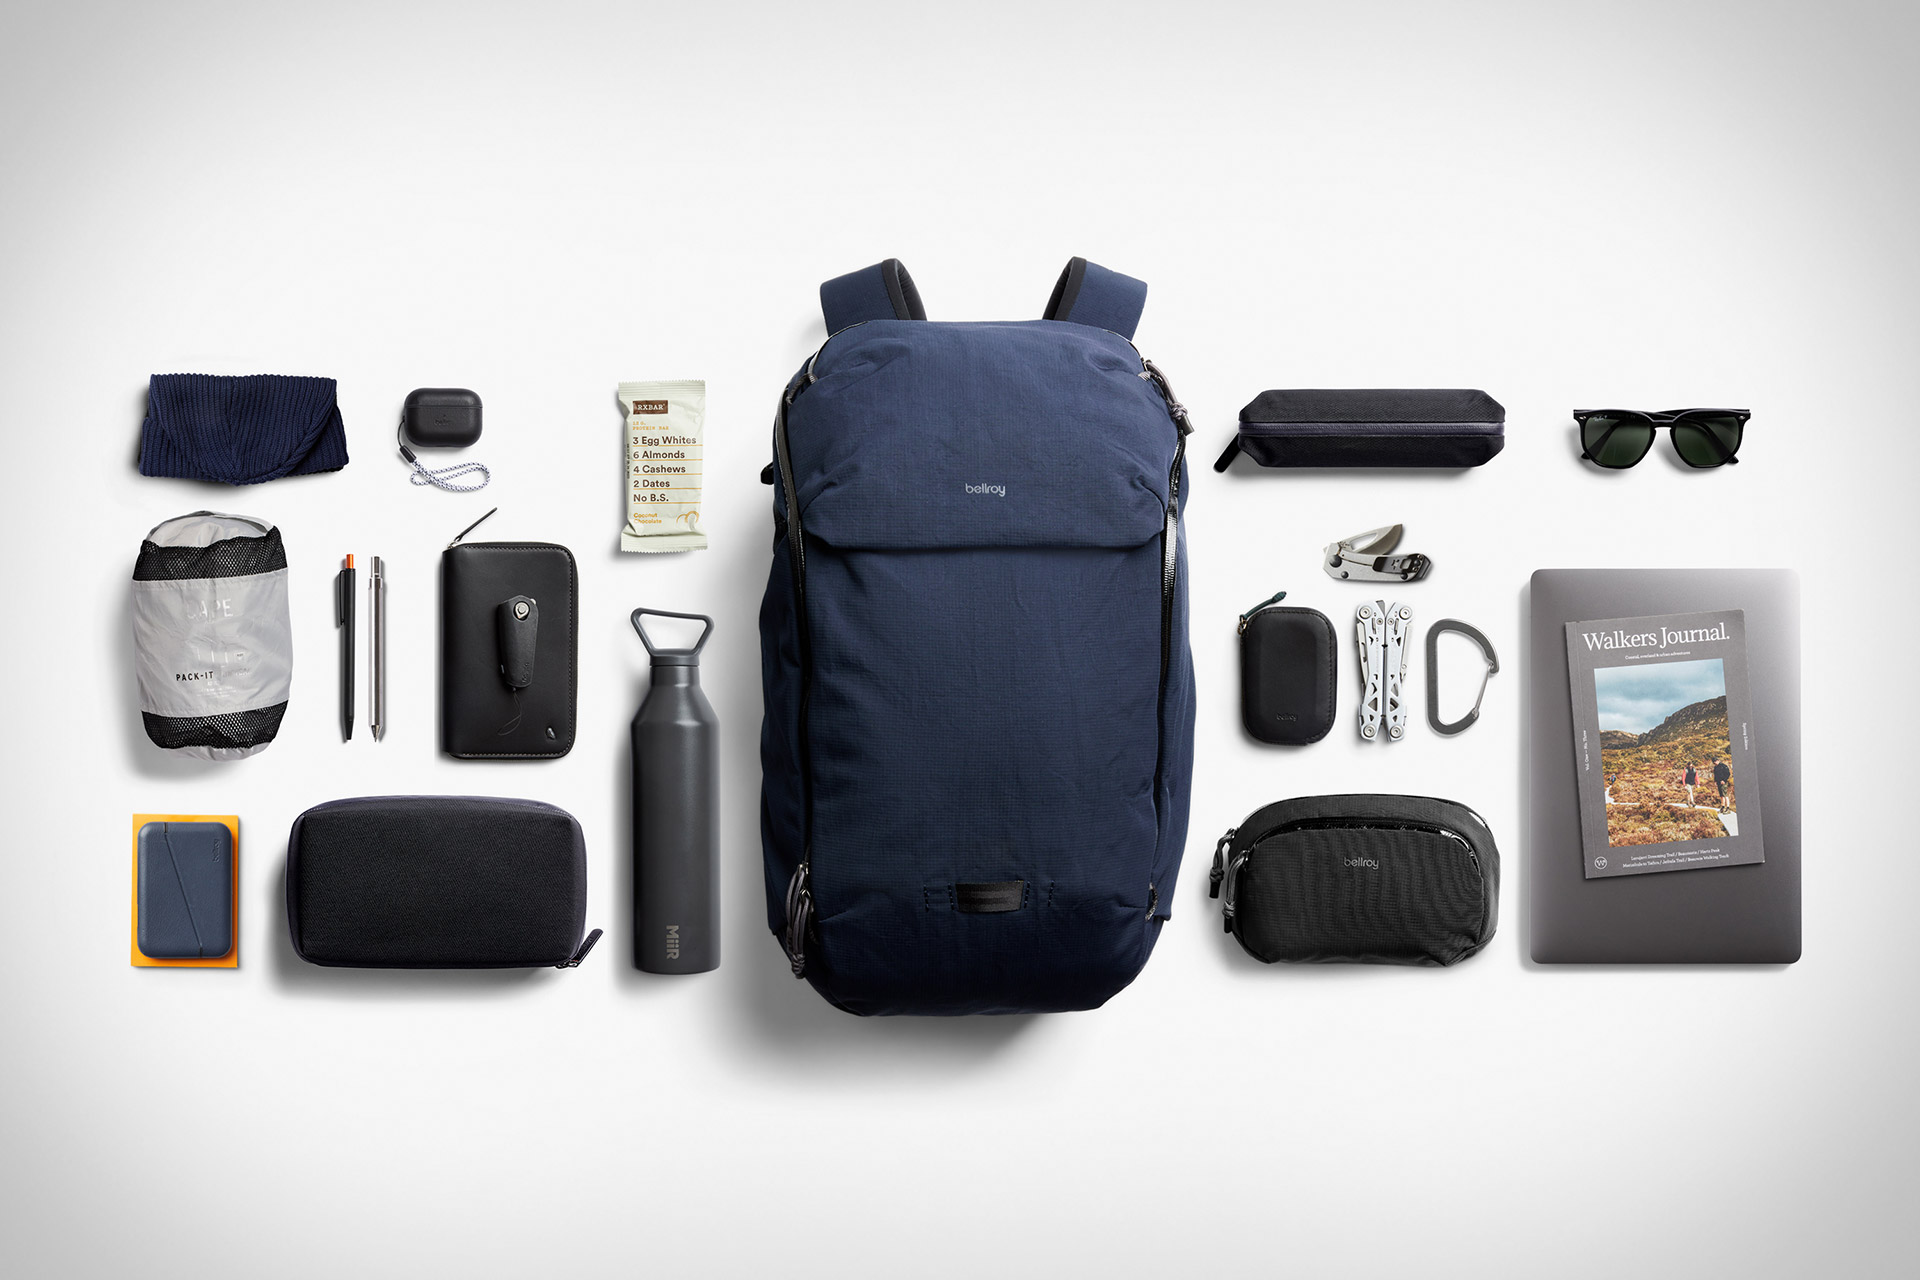 Bellroy Travel Collection | Uncrate, #Bellroy #Travel #Collection #Uncrate